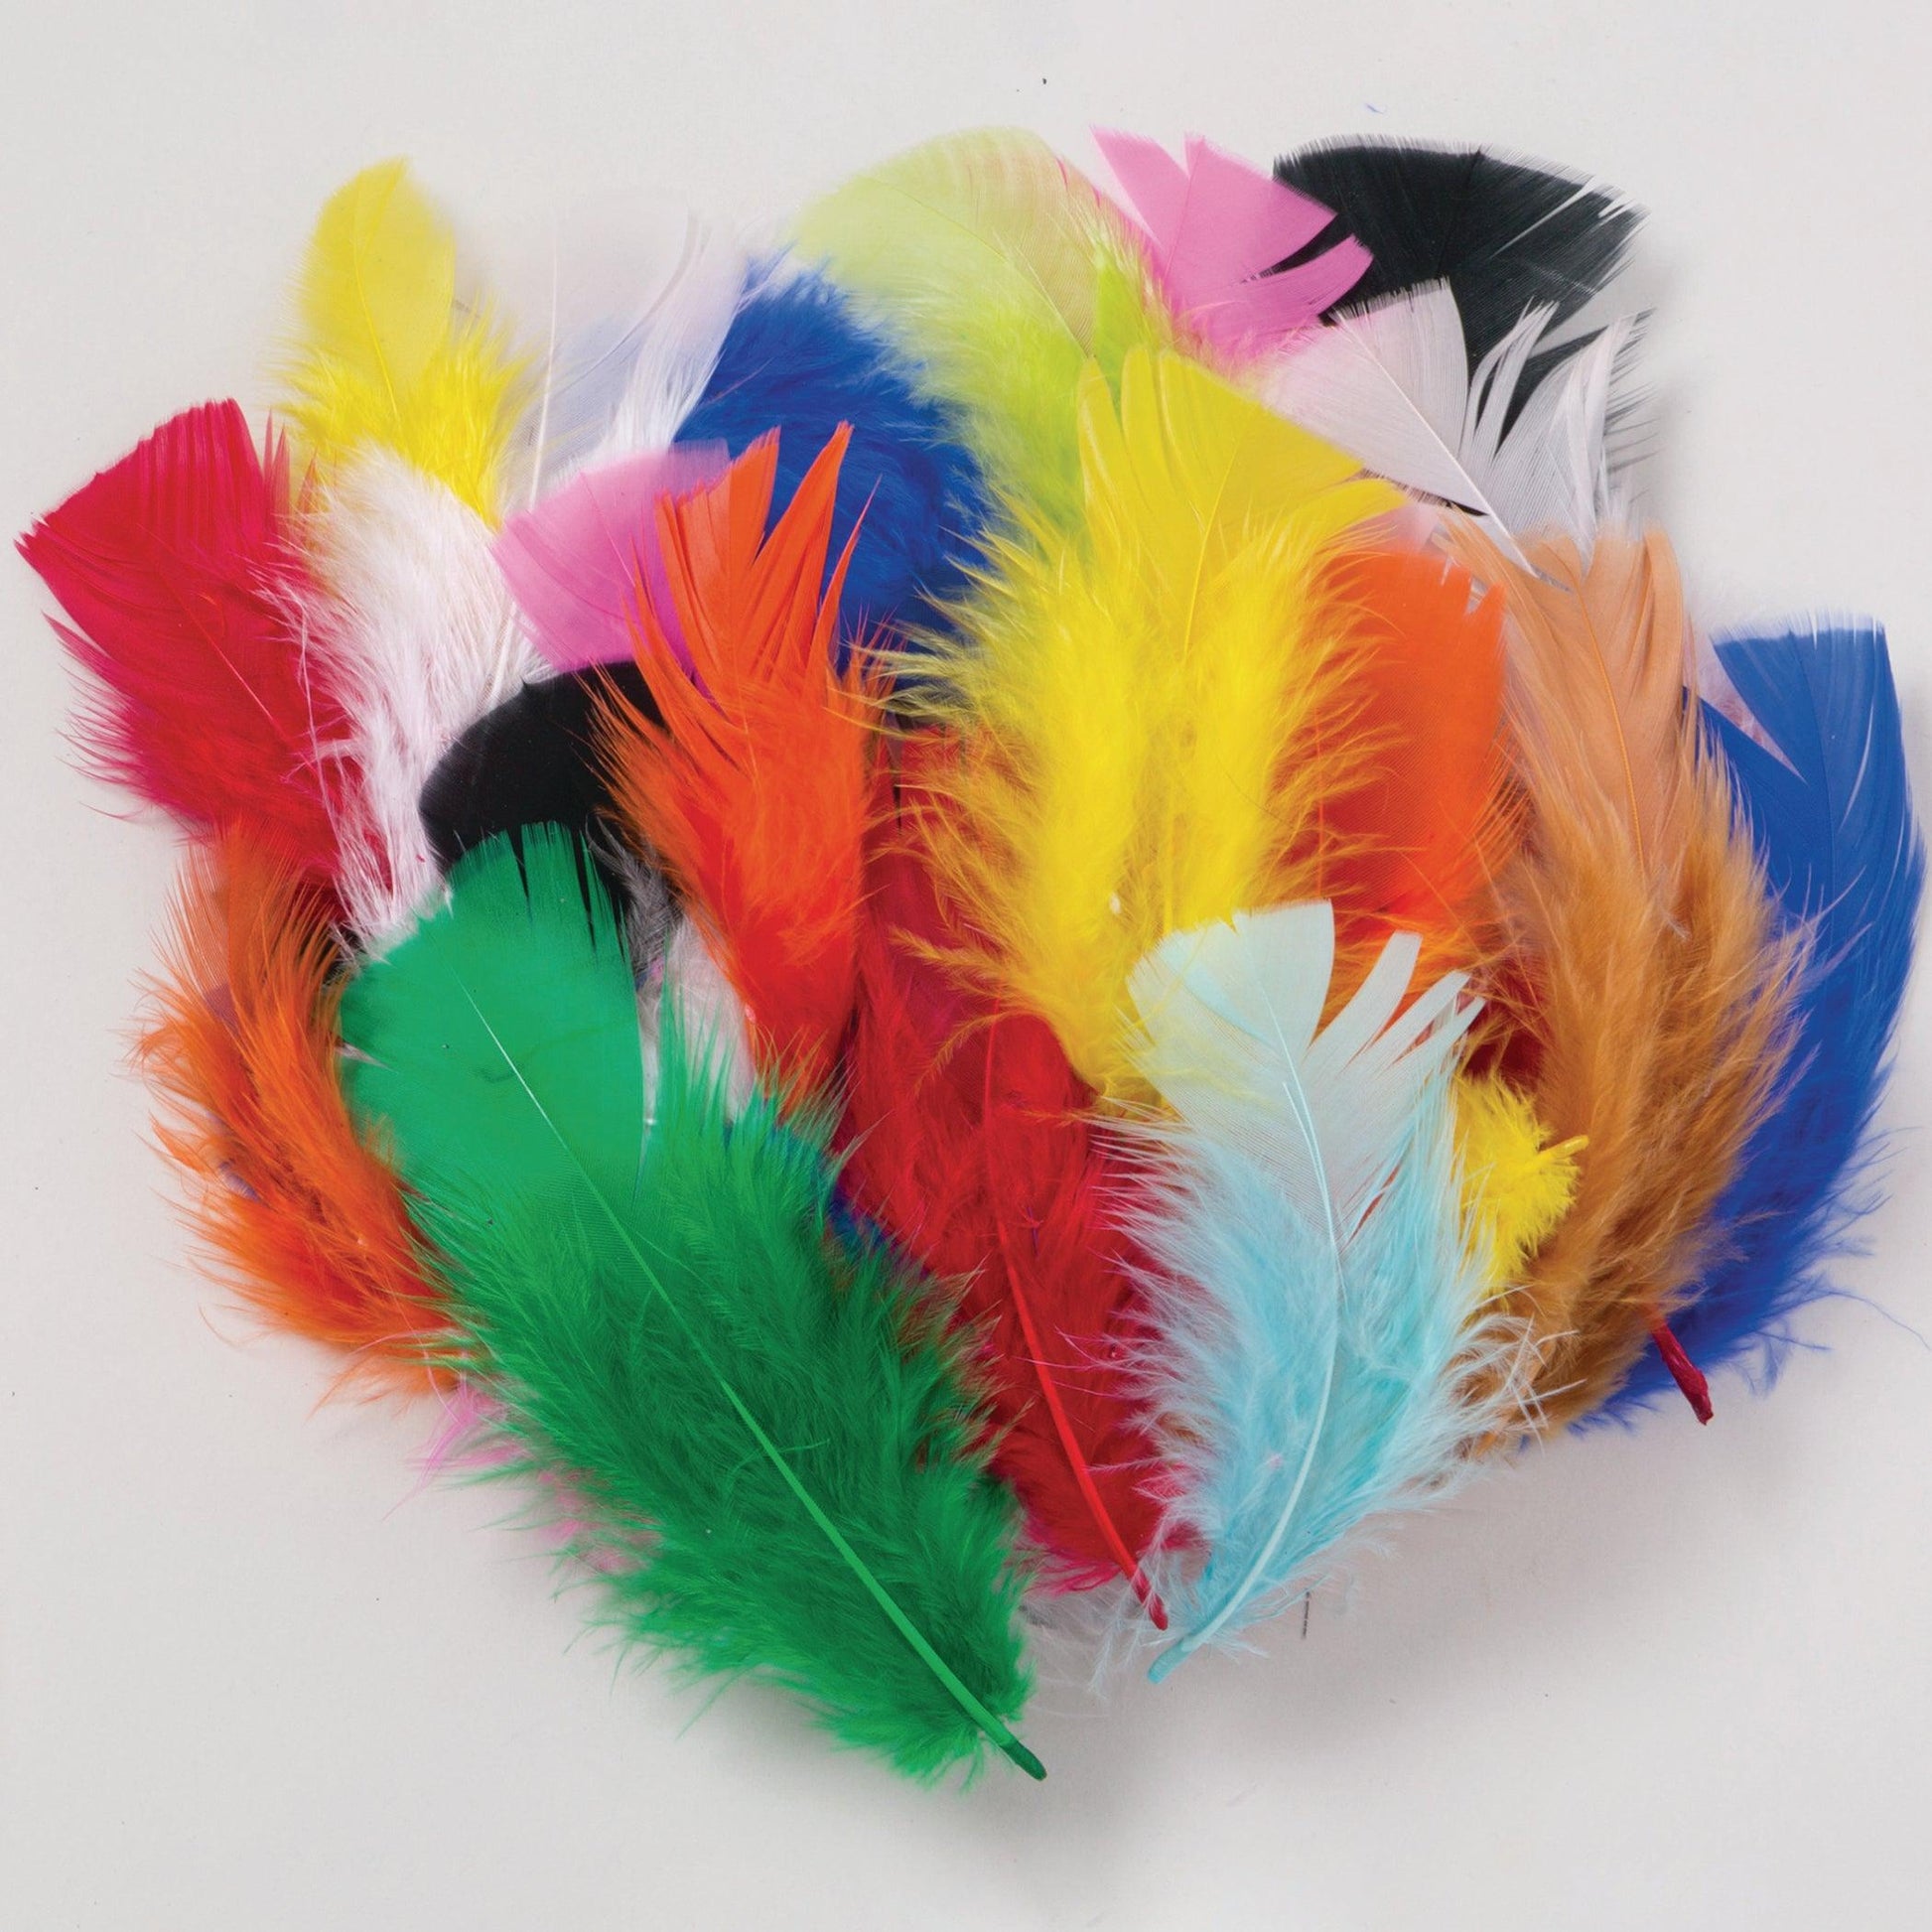 Turkey Plumage Feathers, Bright Hues Assorted, Assorted Sizes, 1 oz. Per Bag, 6 Bags - Loomini